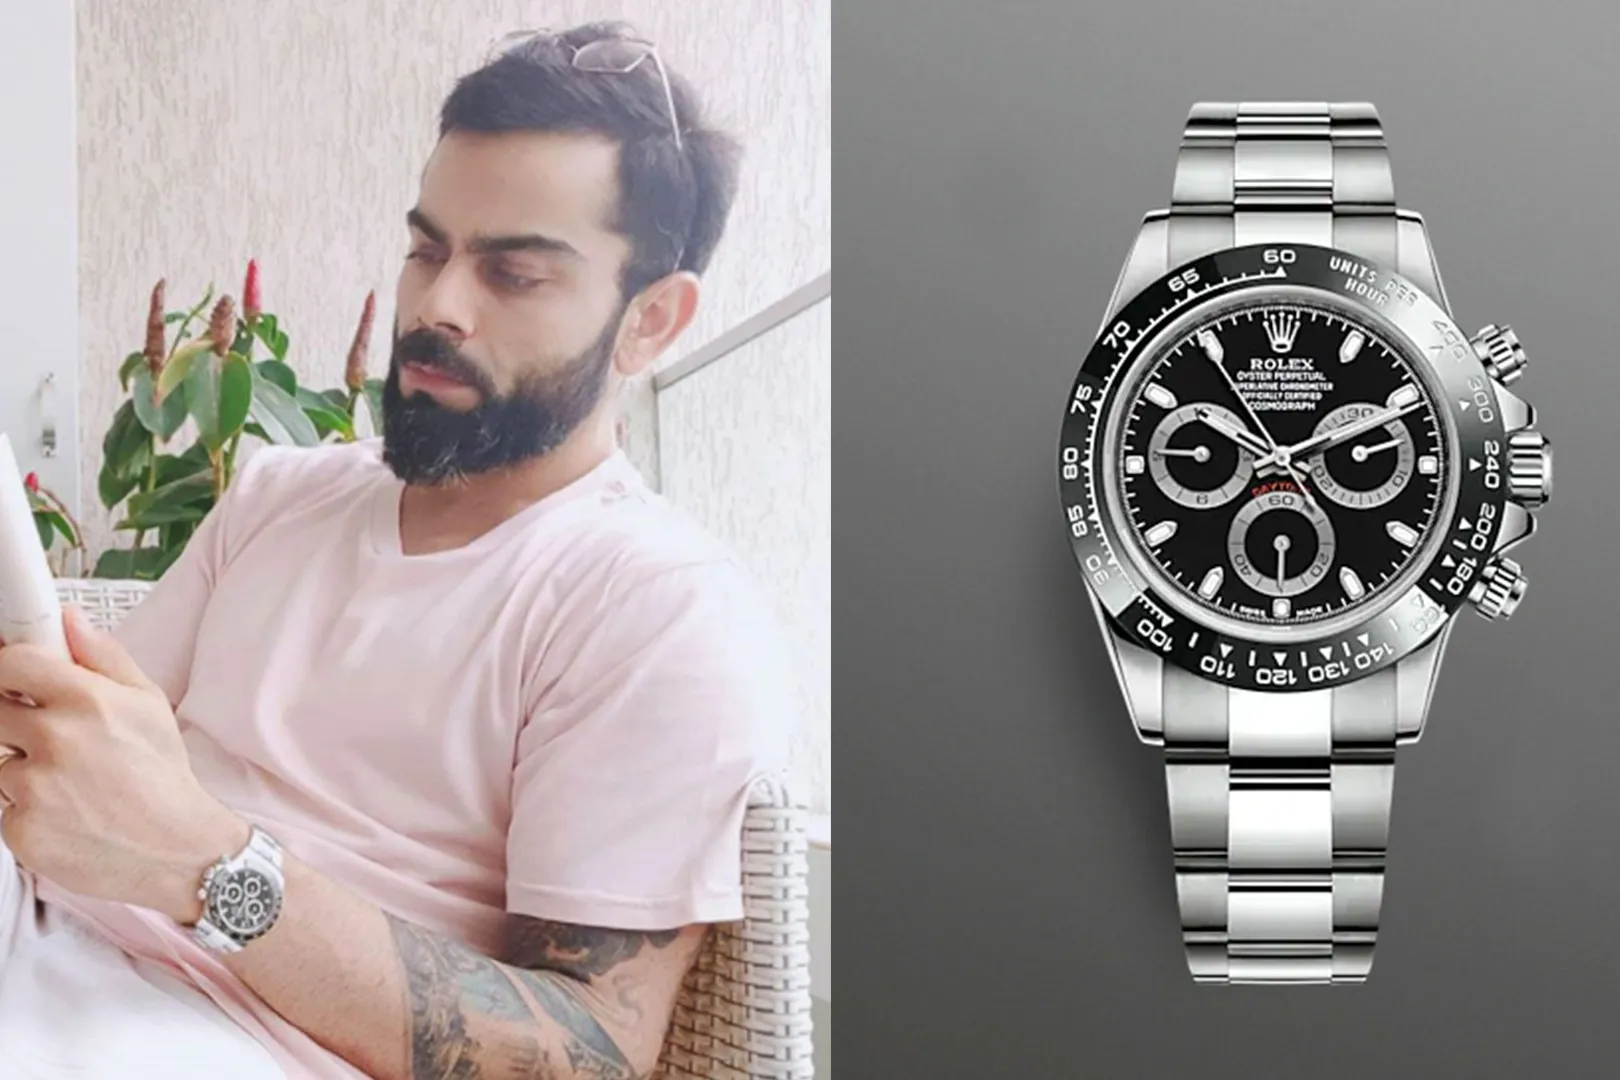 Best Deals with Modern Rolex Duplicate Watches: A Smart Choice for Watch Enthusiasts